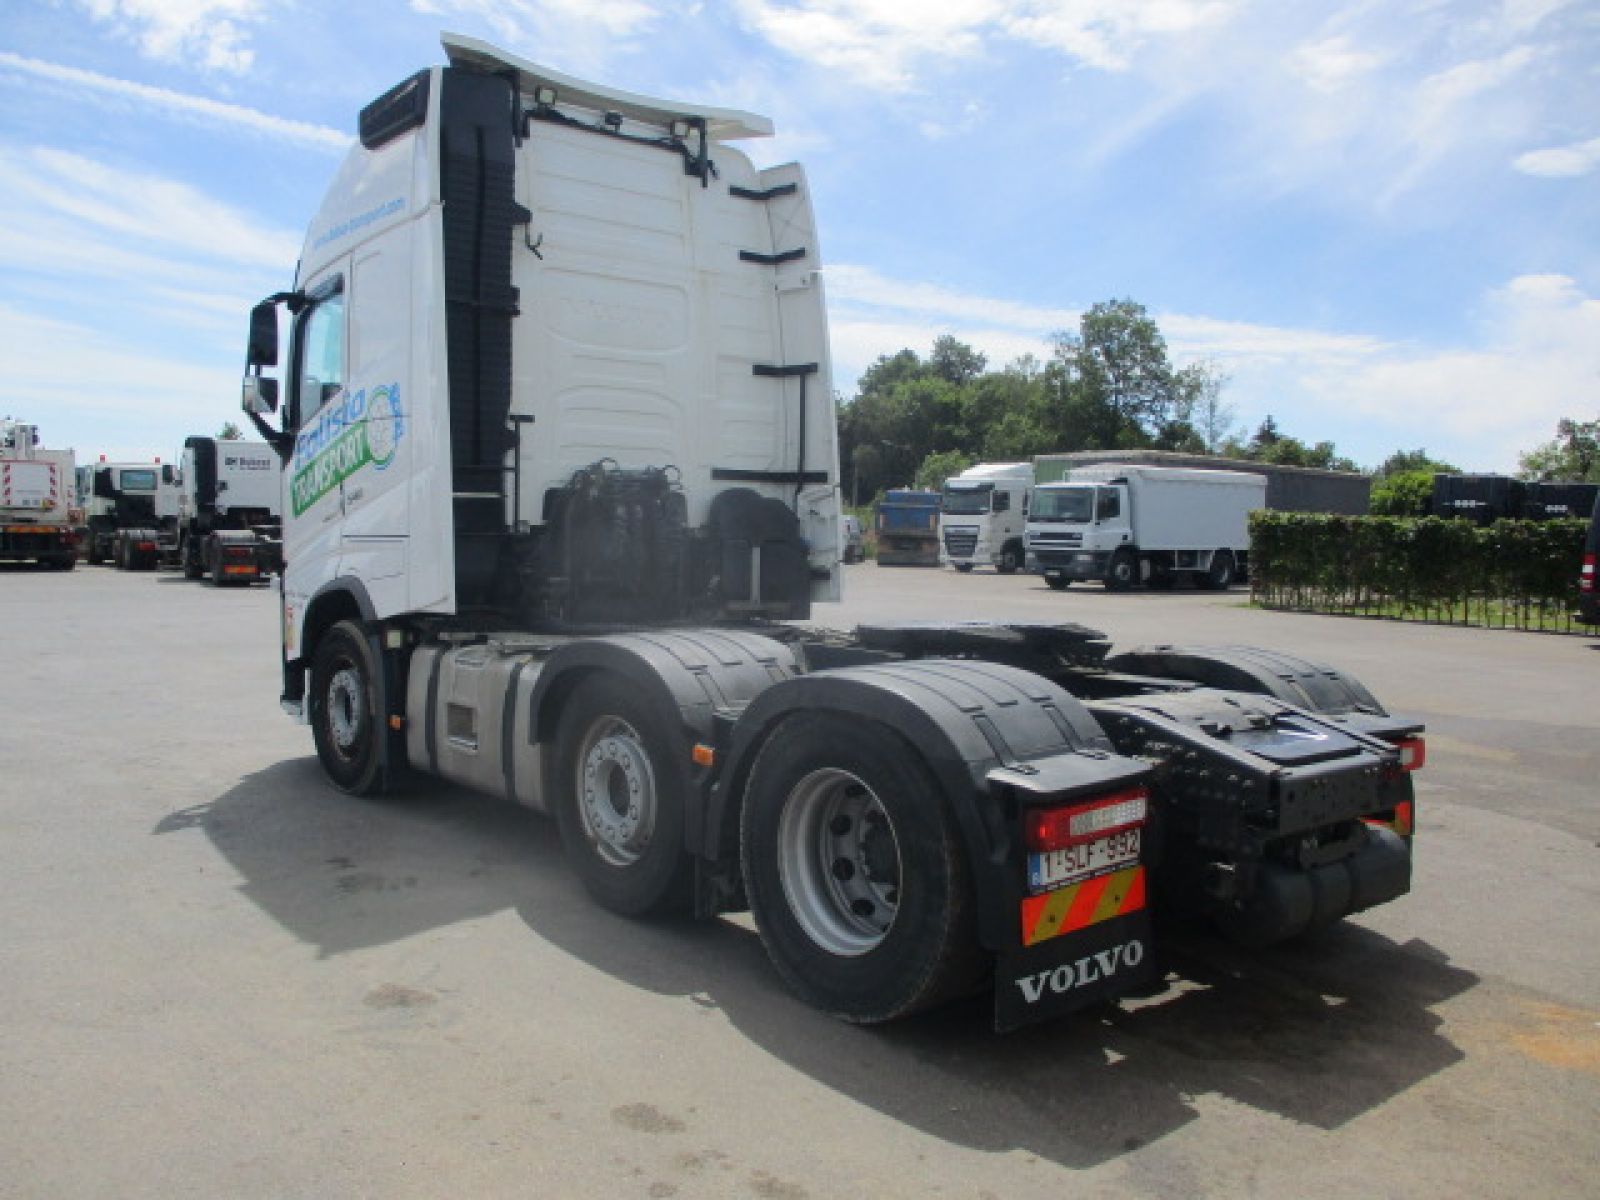 Vente occasion  Tracteur - VOLVO FH 540 RETARDER   (Belgique - Europe) - Houffalize Trading s.a.